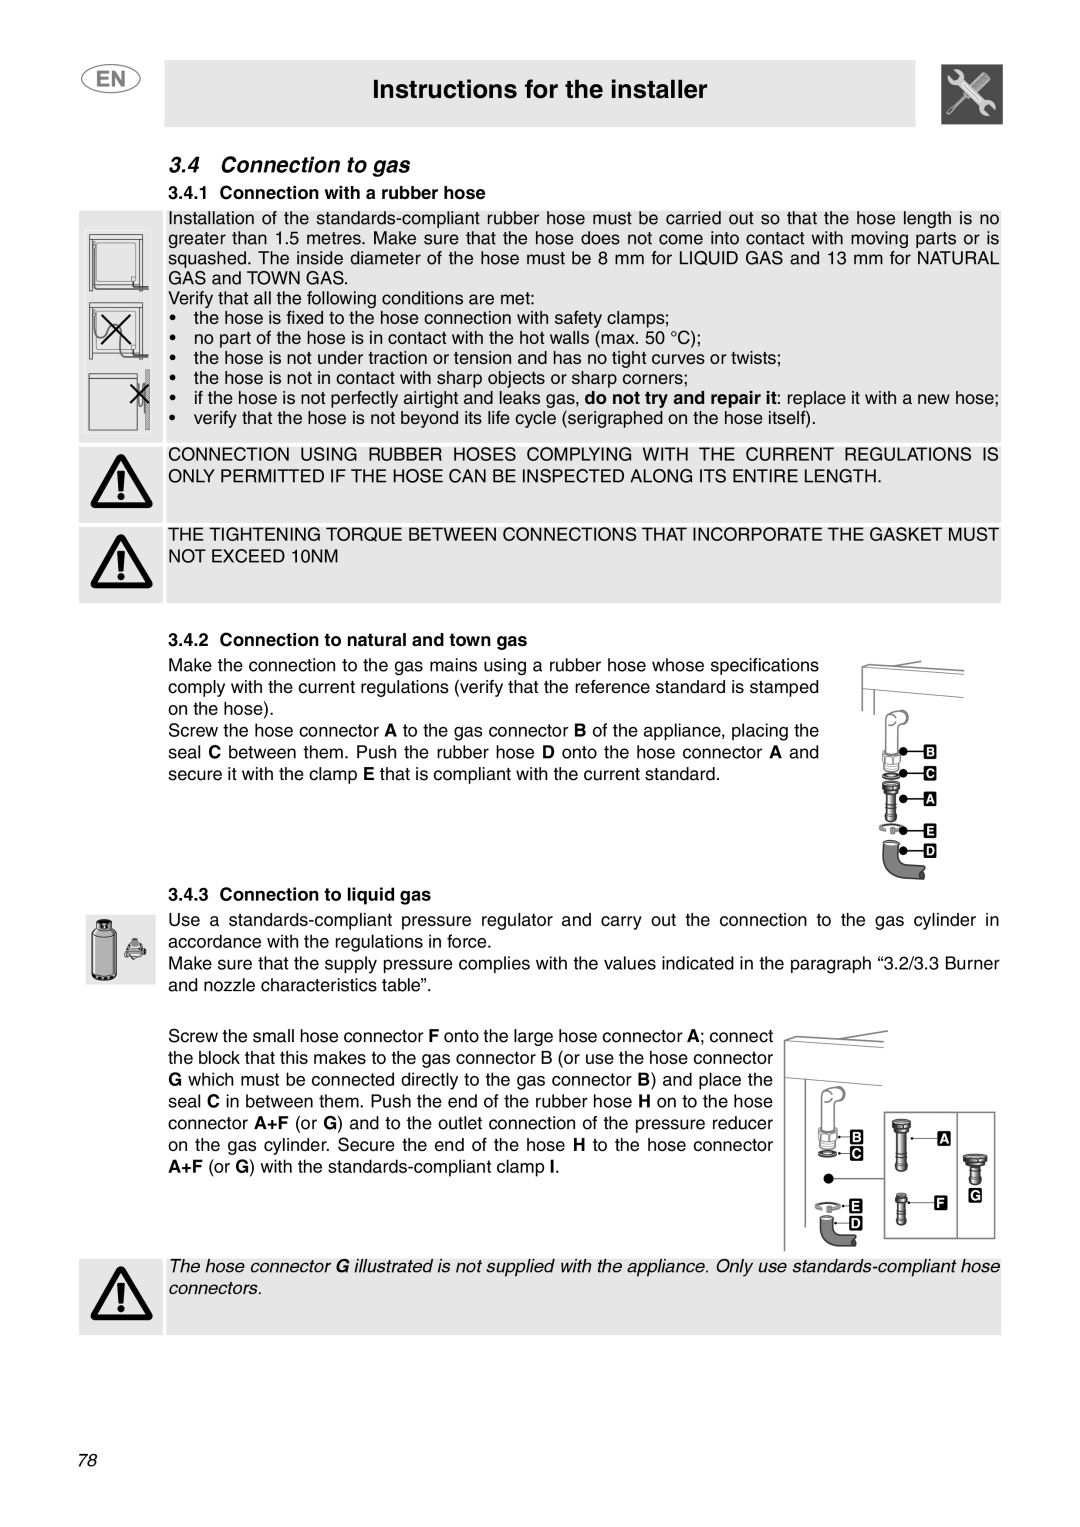 Smeg C6GVXI Connection to gas, Instructions for the installer, Connection with a rubber hose, Connection to liquid gas 